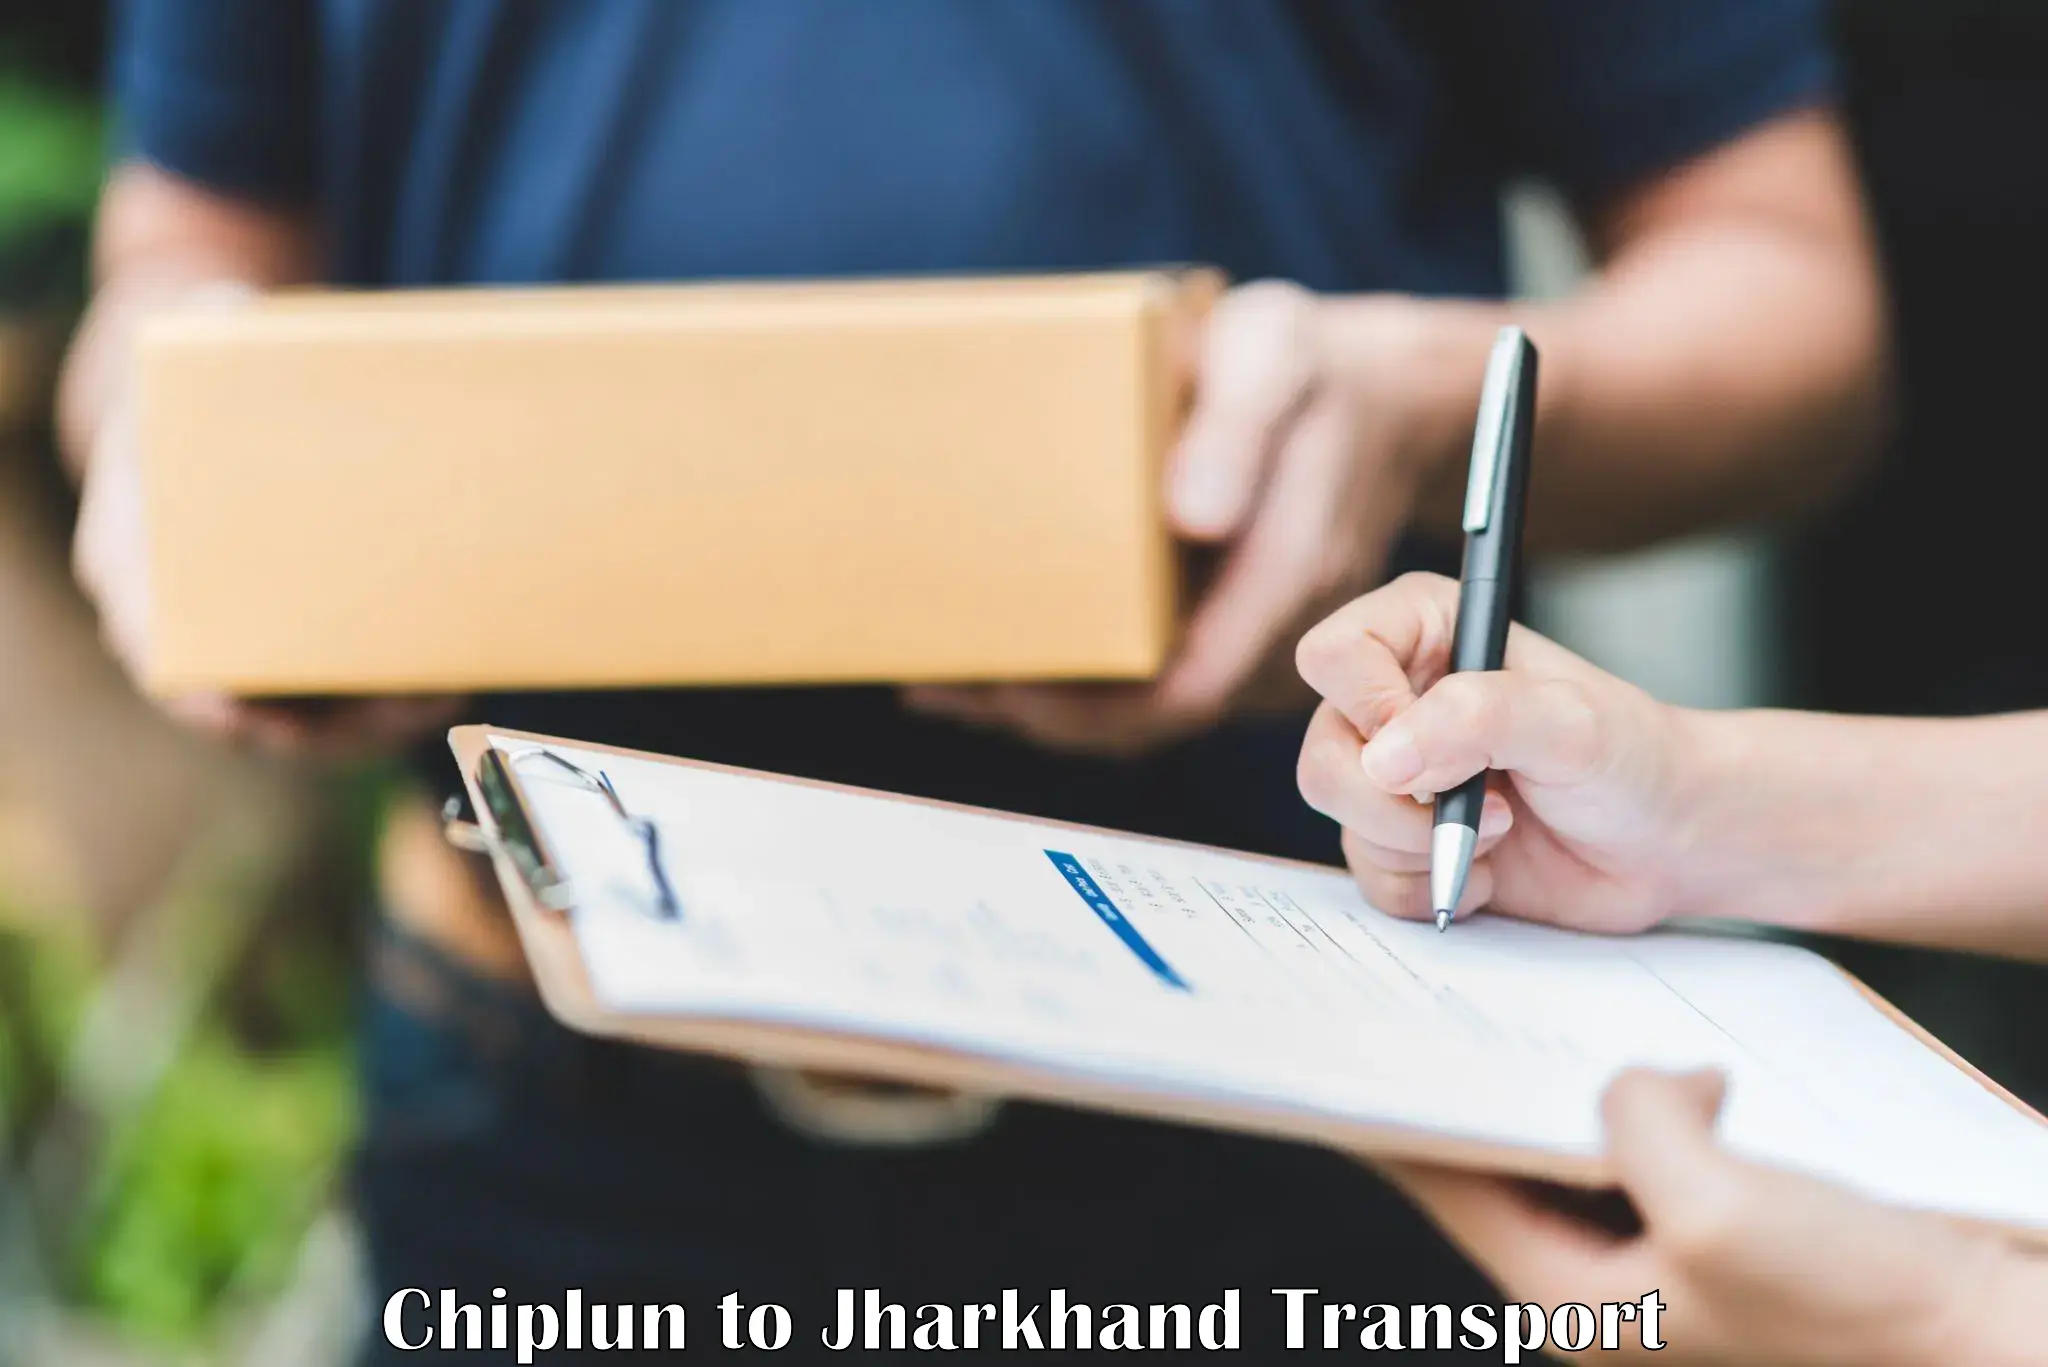 Commercial transport service Chiplun to Chatra